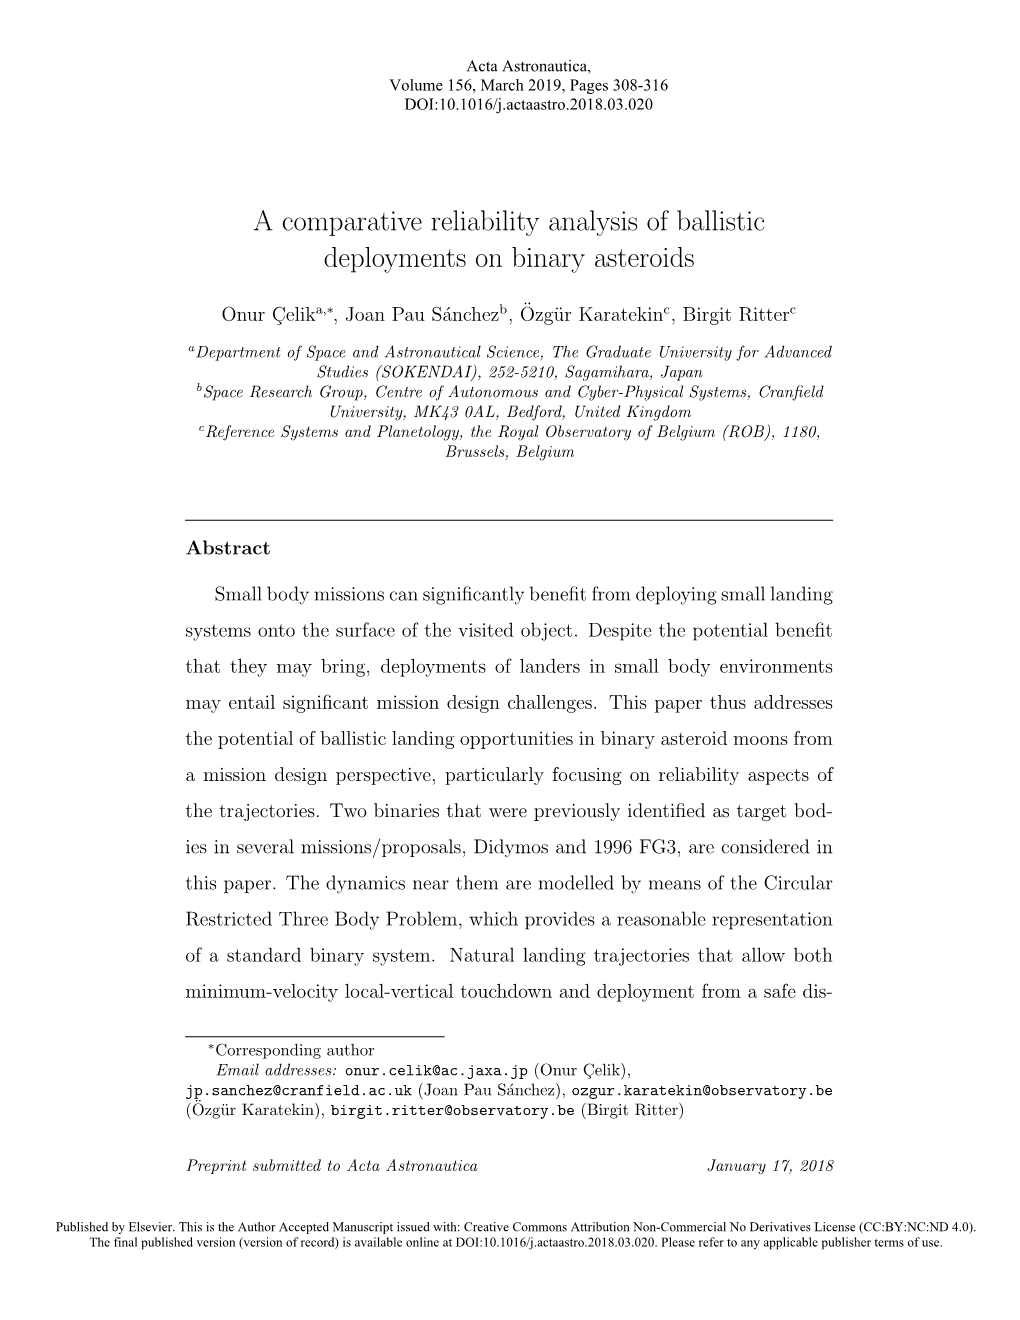 A Comparative Reliability Analysis of Ballistic Deployments on Binary Asteroids